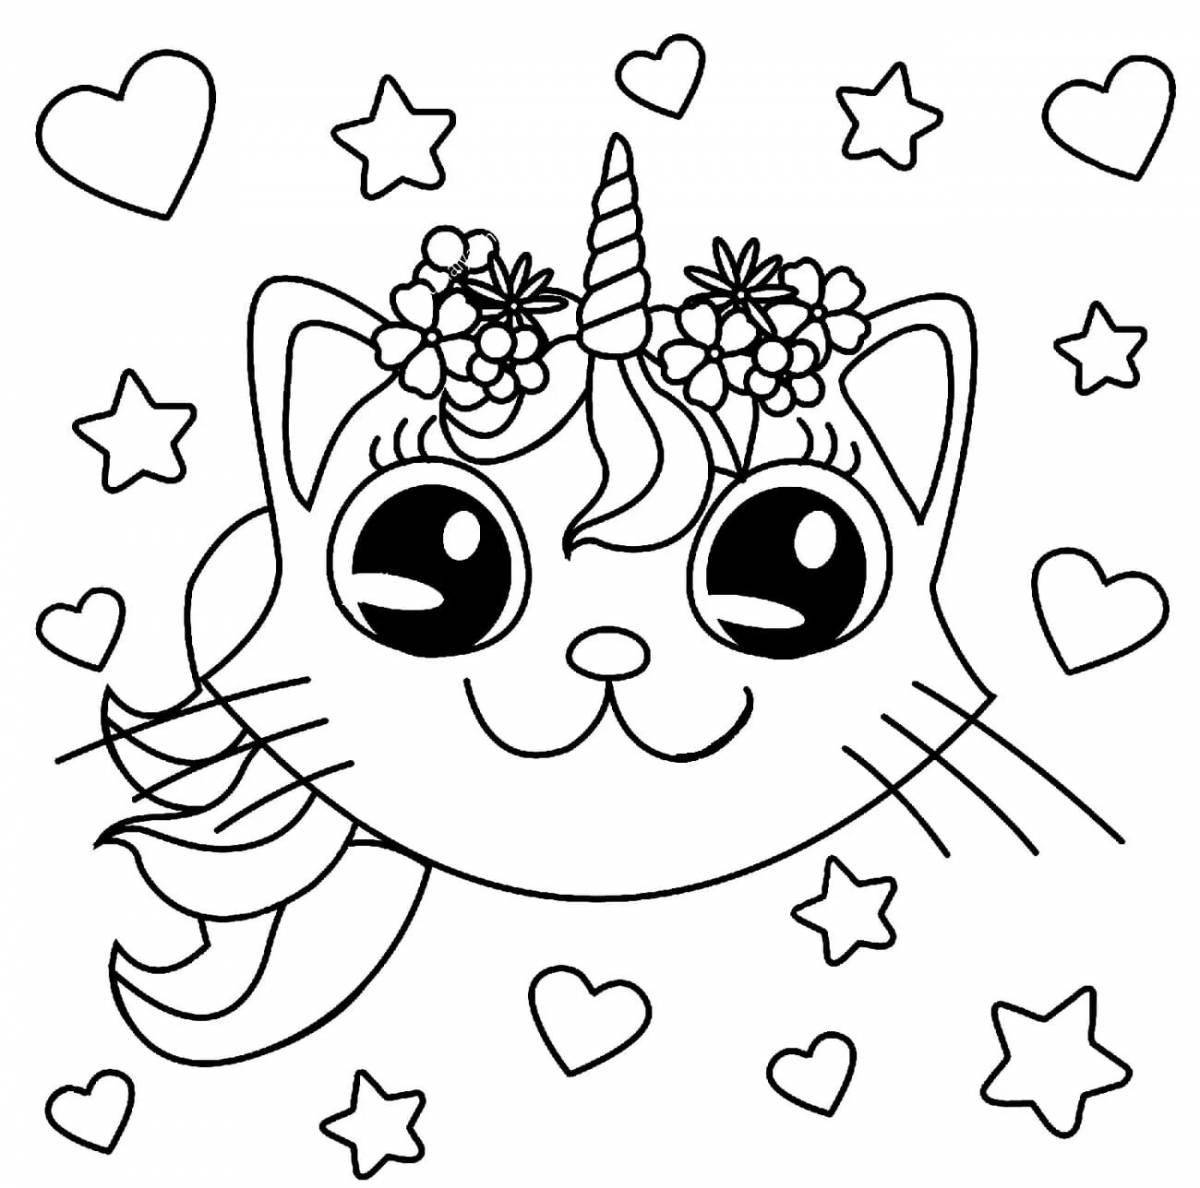 Intriguing unicorn cat coloring book for girls